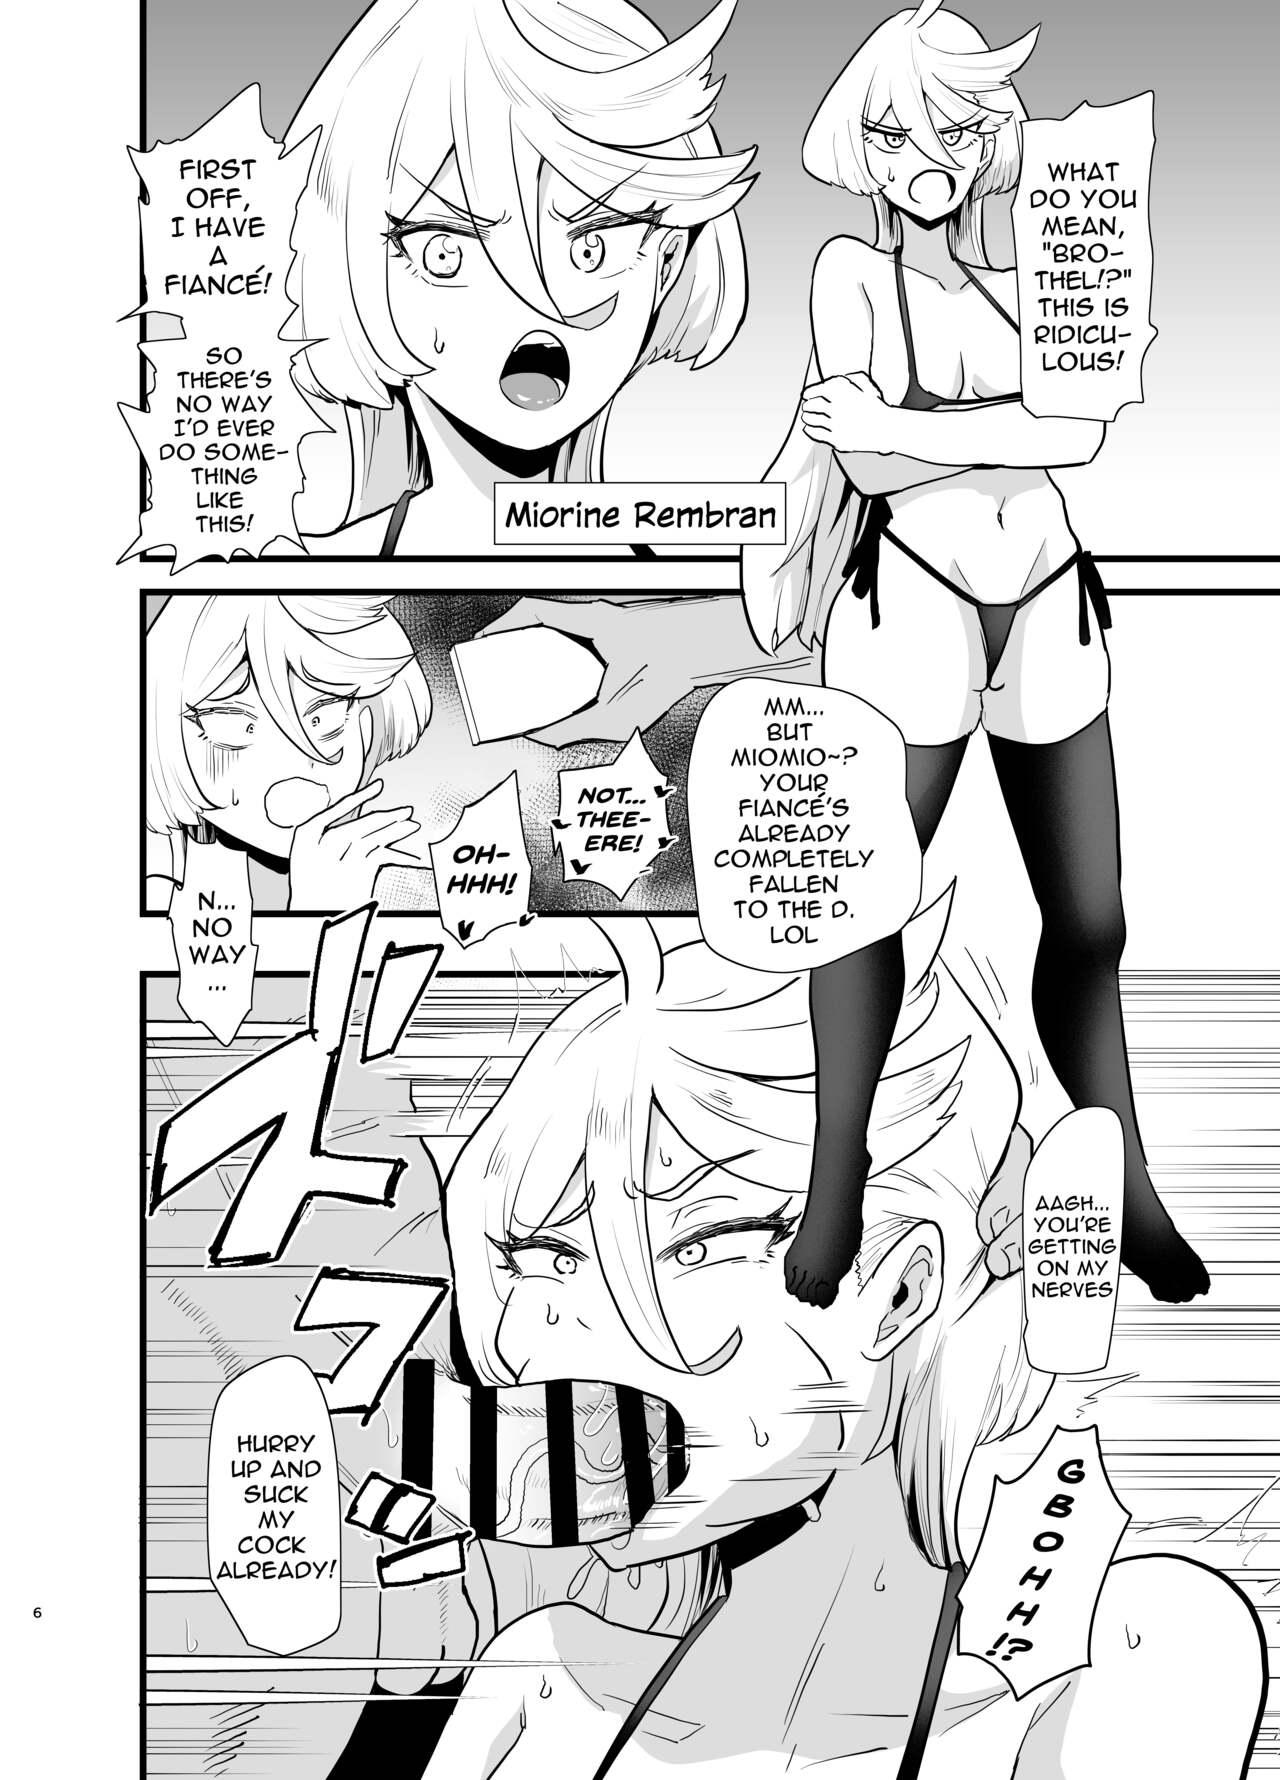 Nasty Gundam Fuuzoku Musou Suisei no Majo Hen | The Unparalleled Gundam Sex Industry - Witch of Mercury Edition - Mobile suit gundam the witch from mercury Cousin - Page 7